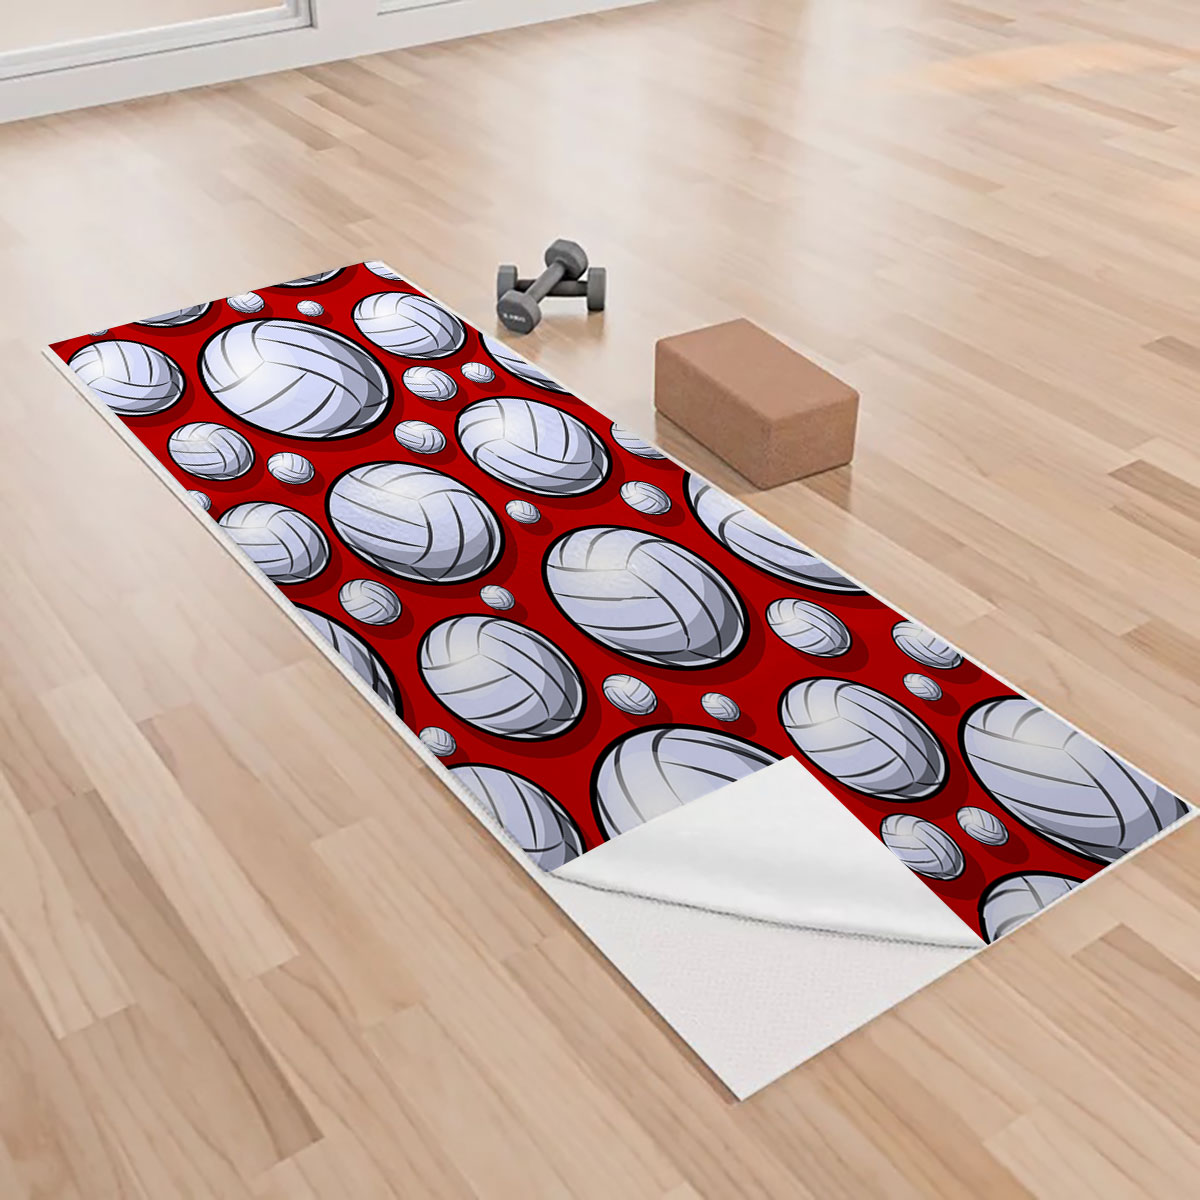 Red Volleyball Yoga Towels